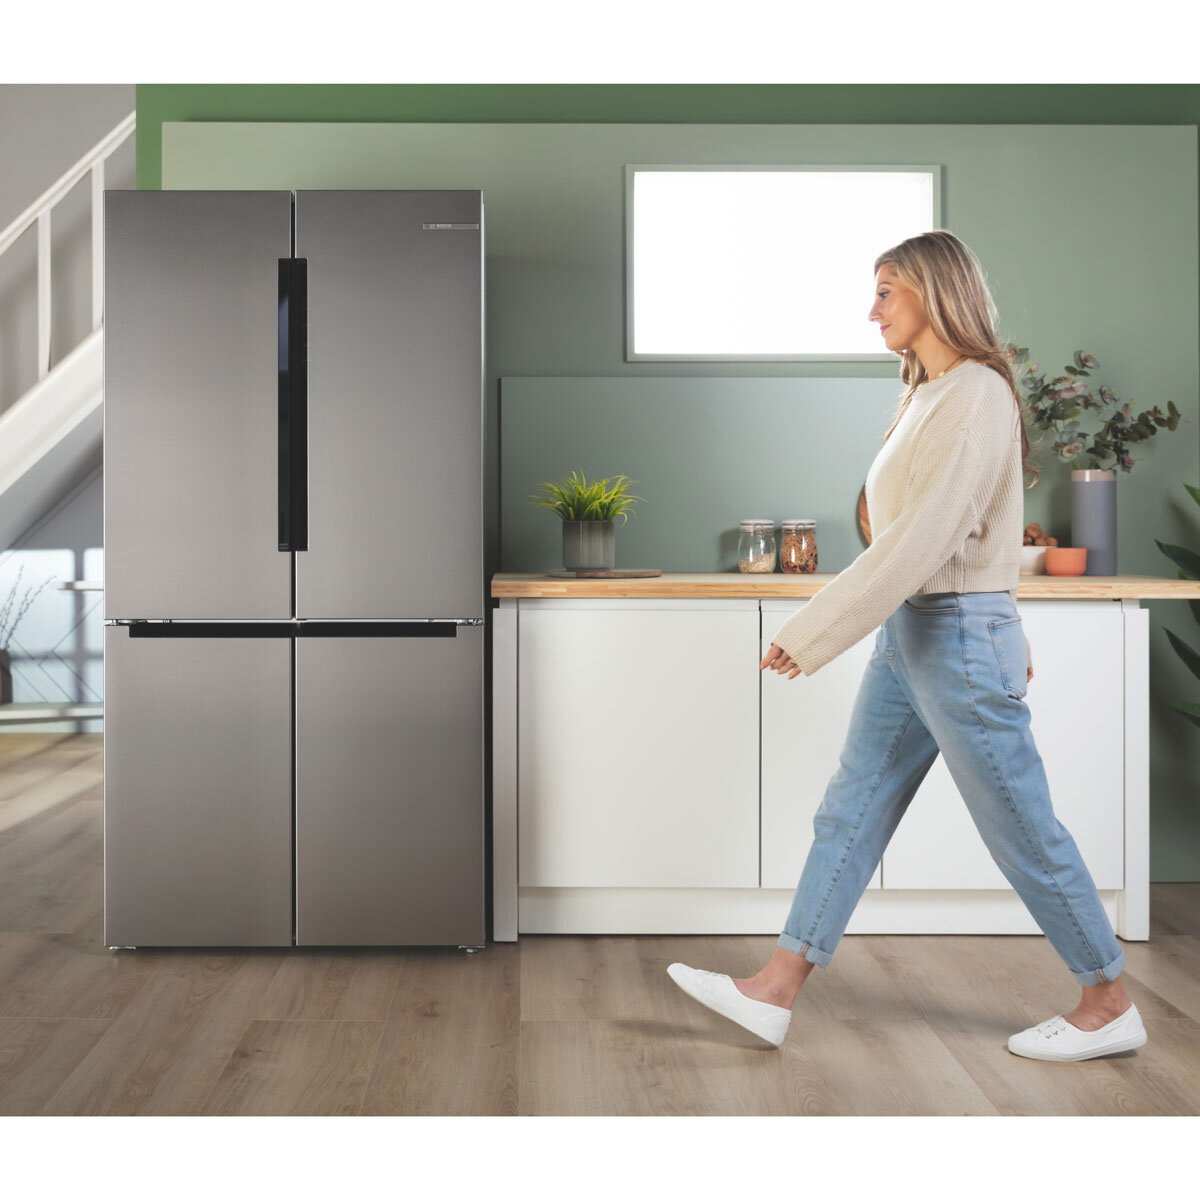 Buy Bosch KFN96VPEAG, Freestanding Fridge Freezer, E Rated in Stainless Steel at Costco.co.uk